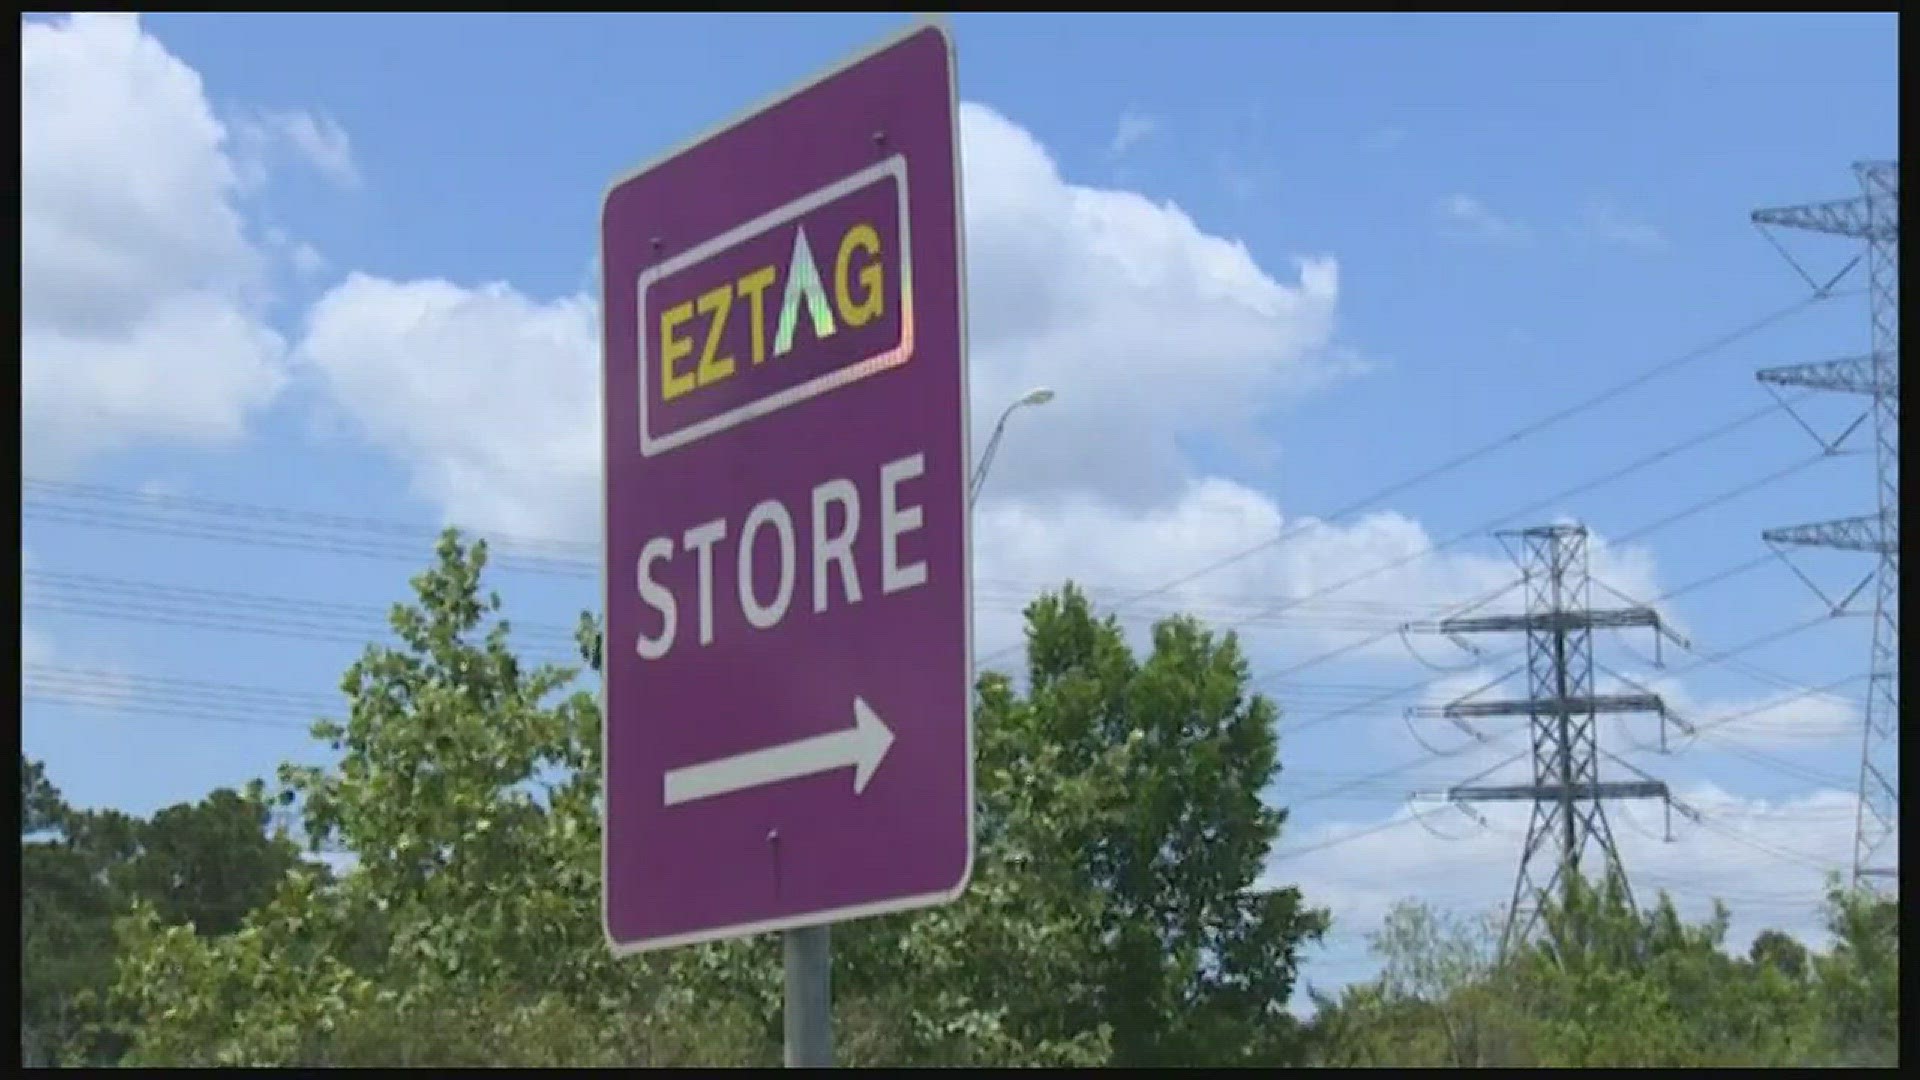 Some drivers are upset with the EZ Tag system after trying to pay off fines and fees but were not able to online, over the phone or even in person.